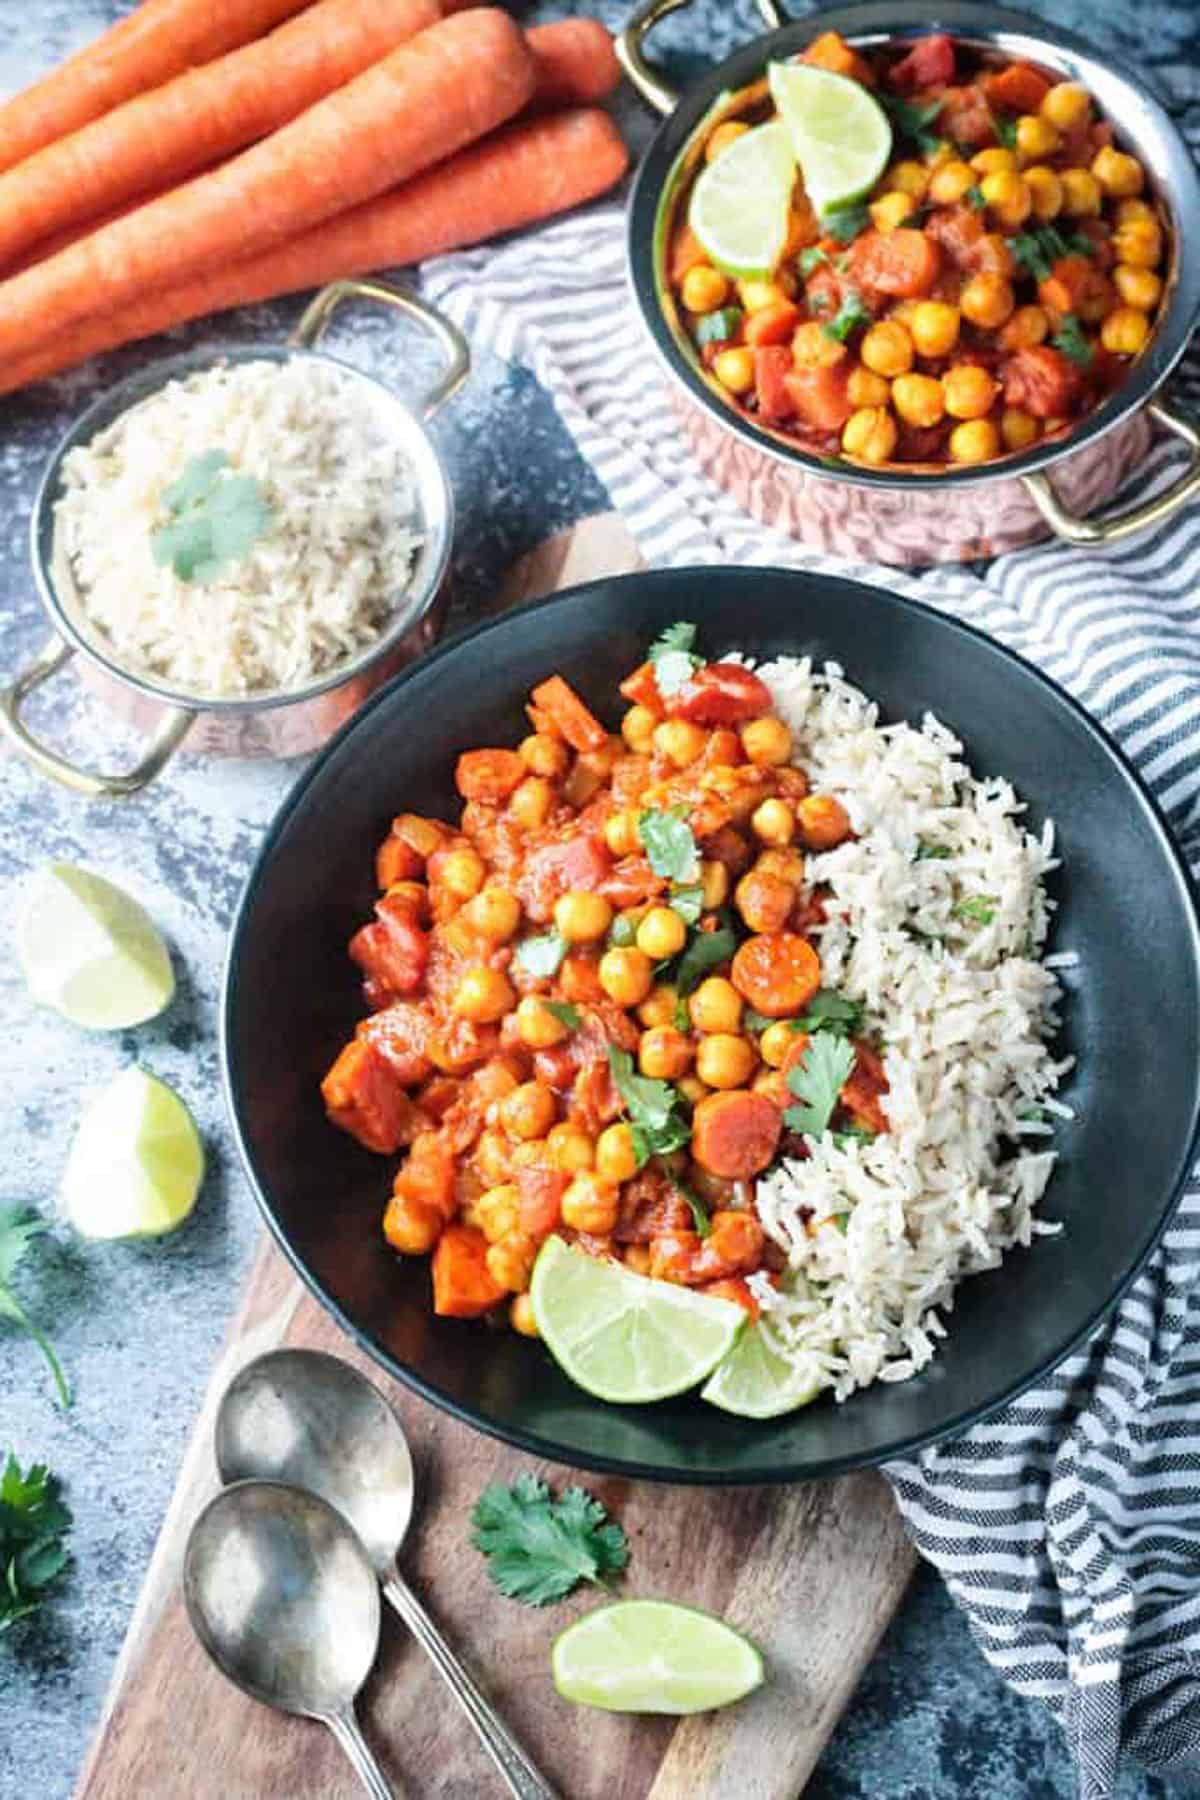 Chunky chickpea vegetable stew next to white rice in a black bowl.